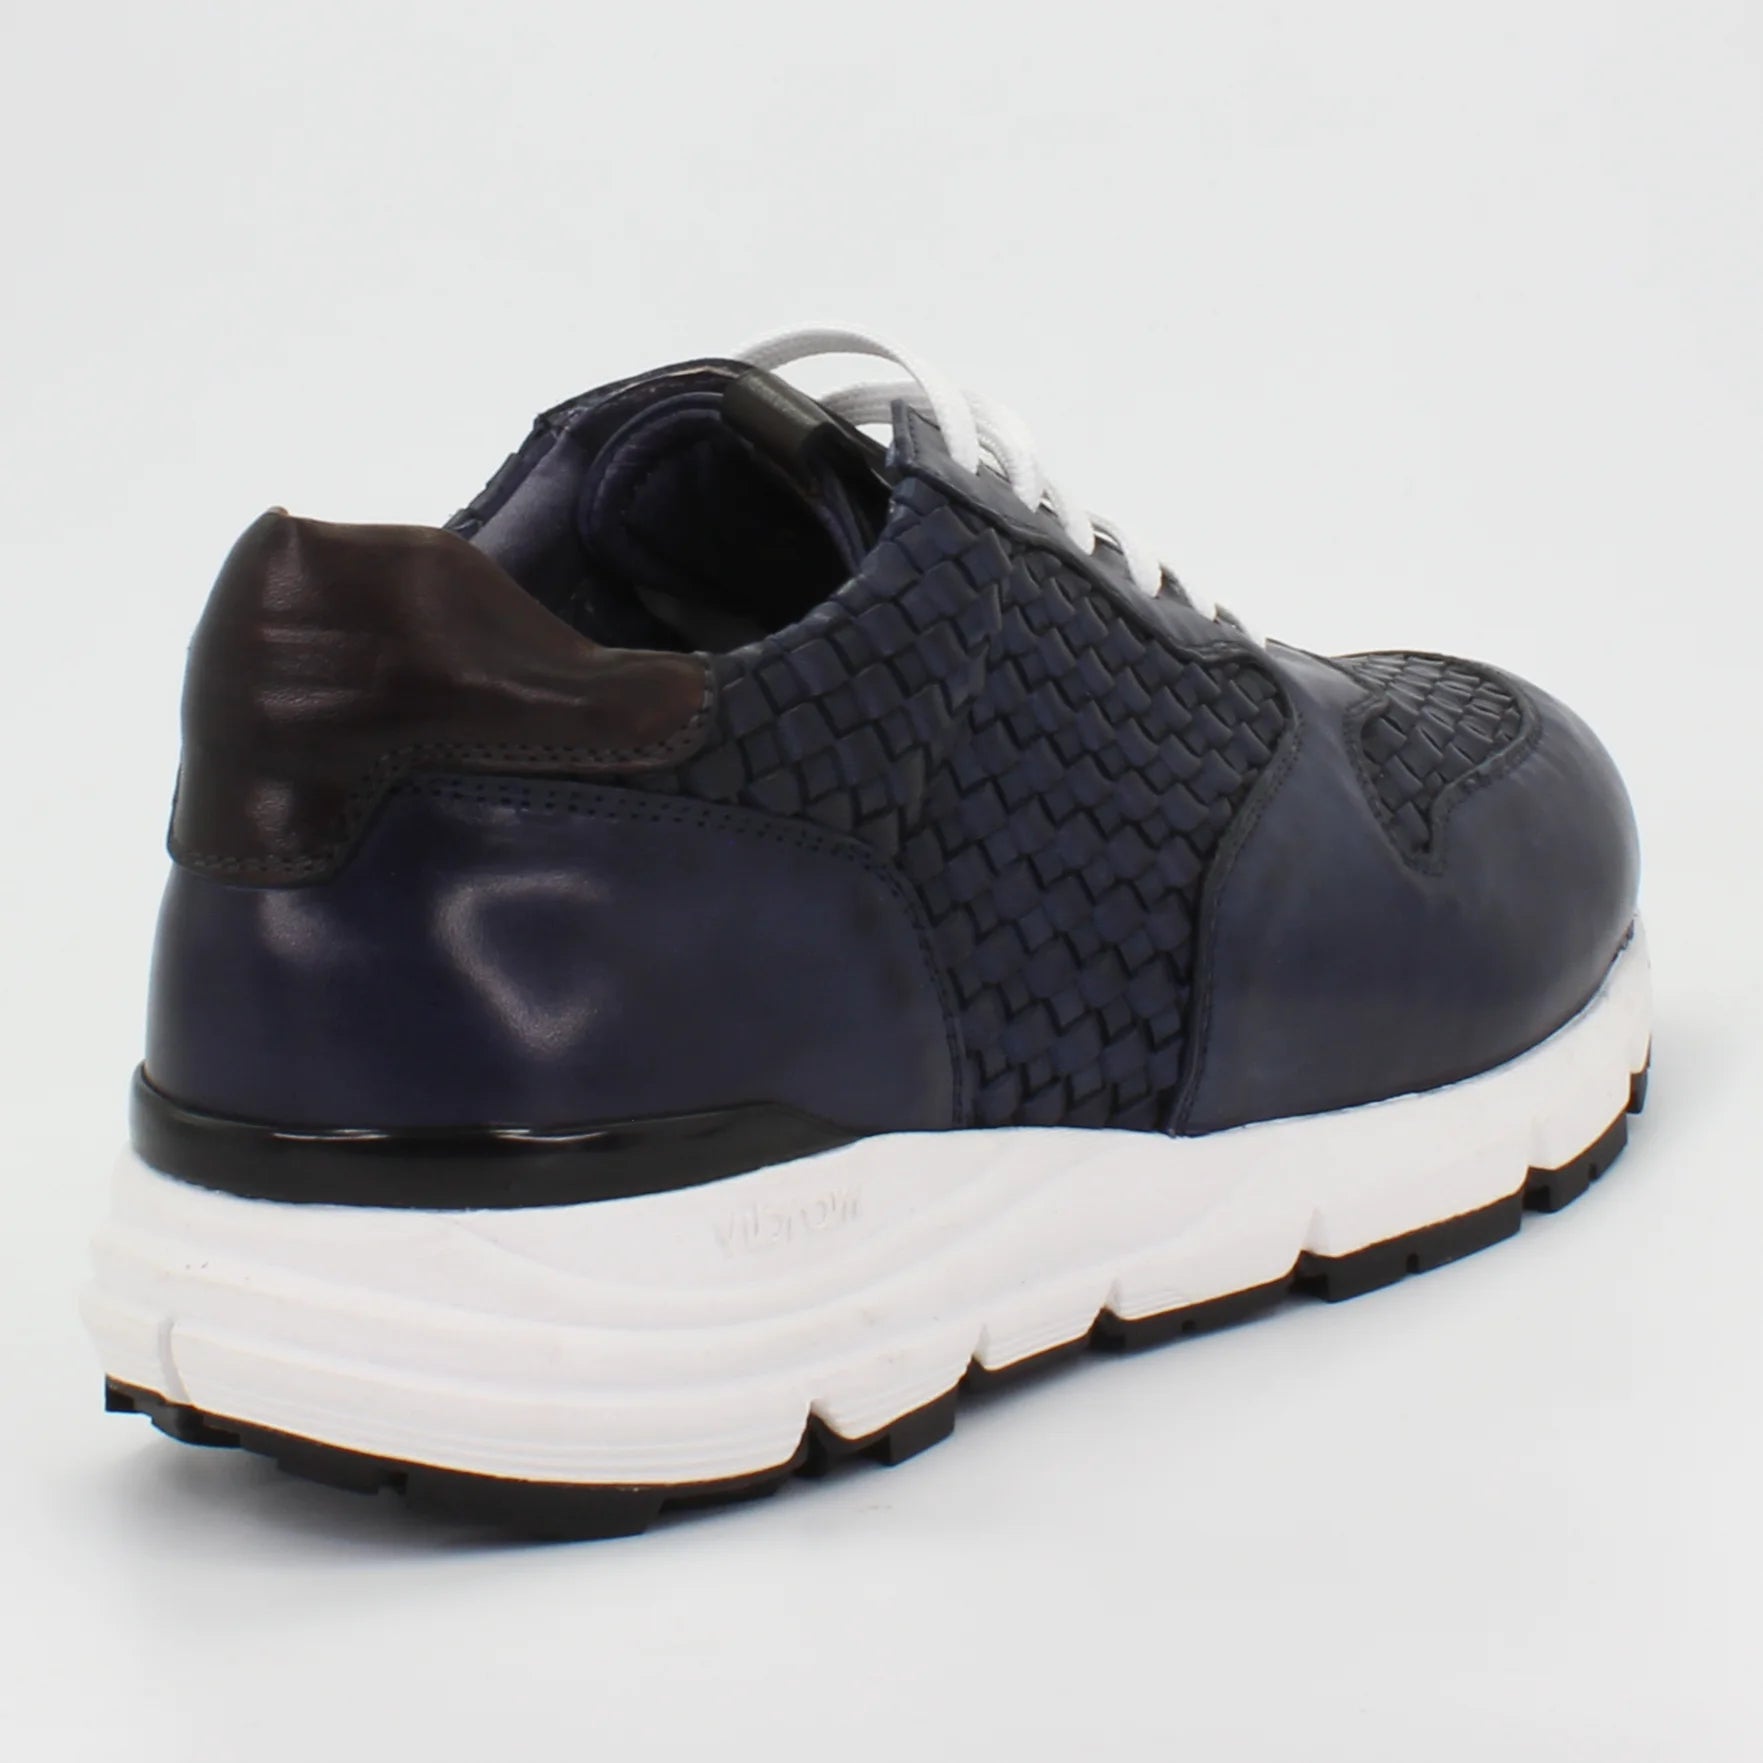 Shop Handmade Italian Leather woven sneaker in navy blue (BRU11375) or browse our range of hand-made Italian shoes for men in leather or suede in-store at Aliverti Cape Town, or shop online. We deliver in South Africa & offer multiple payment plans as well as accept multiple safe & secure payment methods.